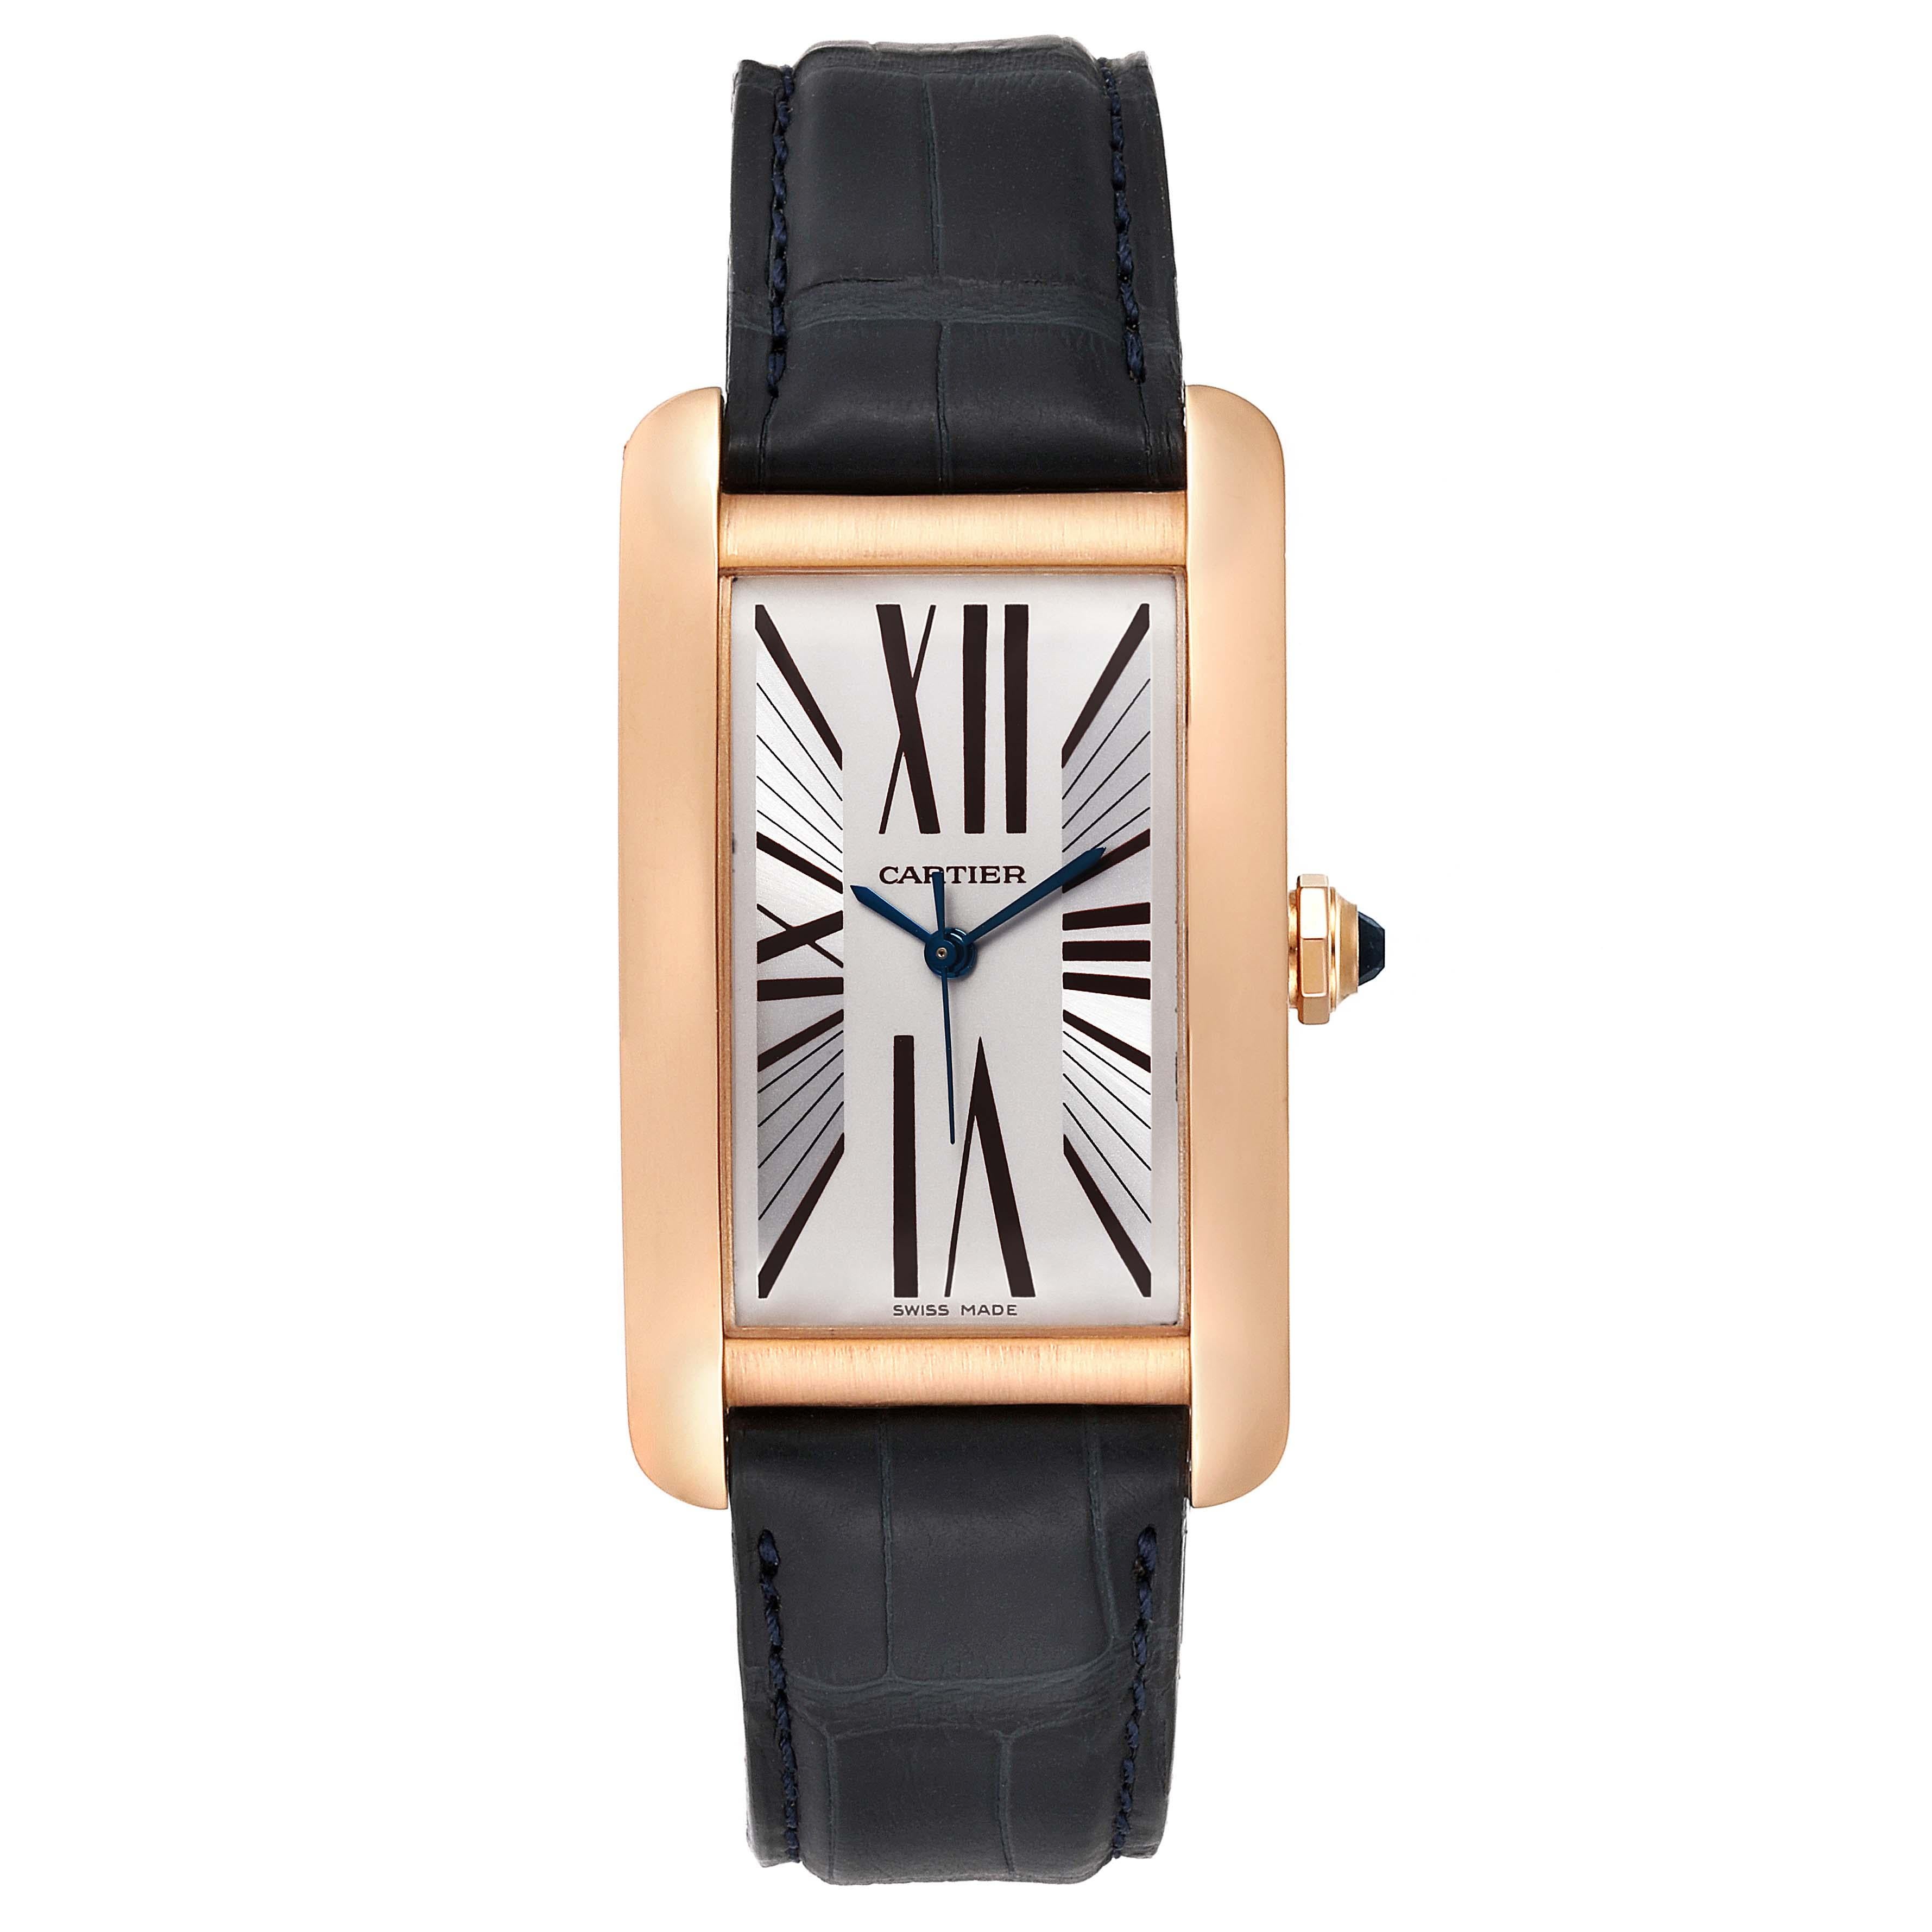 Cartier Tank Americaine Silver Dial Rose Gold Automatic Mens Watch 2505. Automatic self-winding movement. Caliber 120, rhodium-plated, fausses cotes and oeil-de-perdrix decoration, 20 jewels, straight line lever escapement, monometallic balance